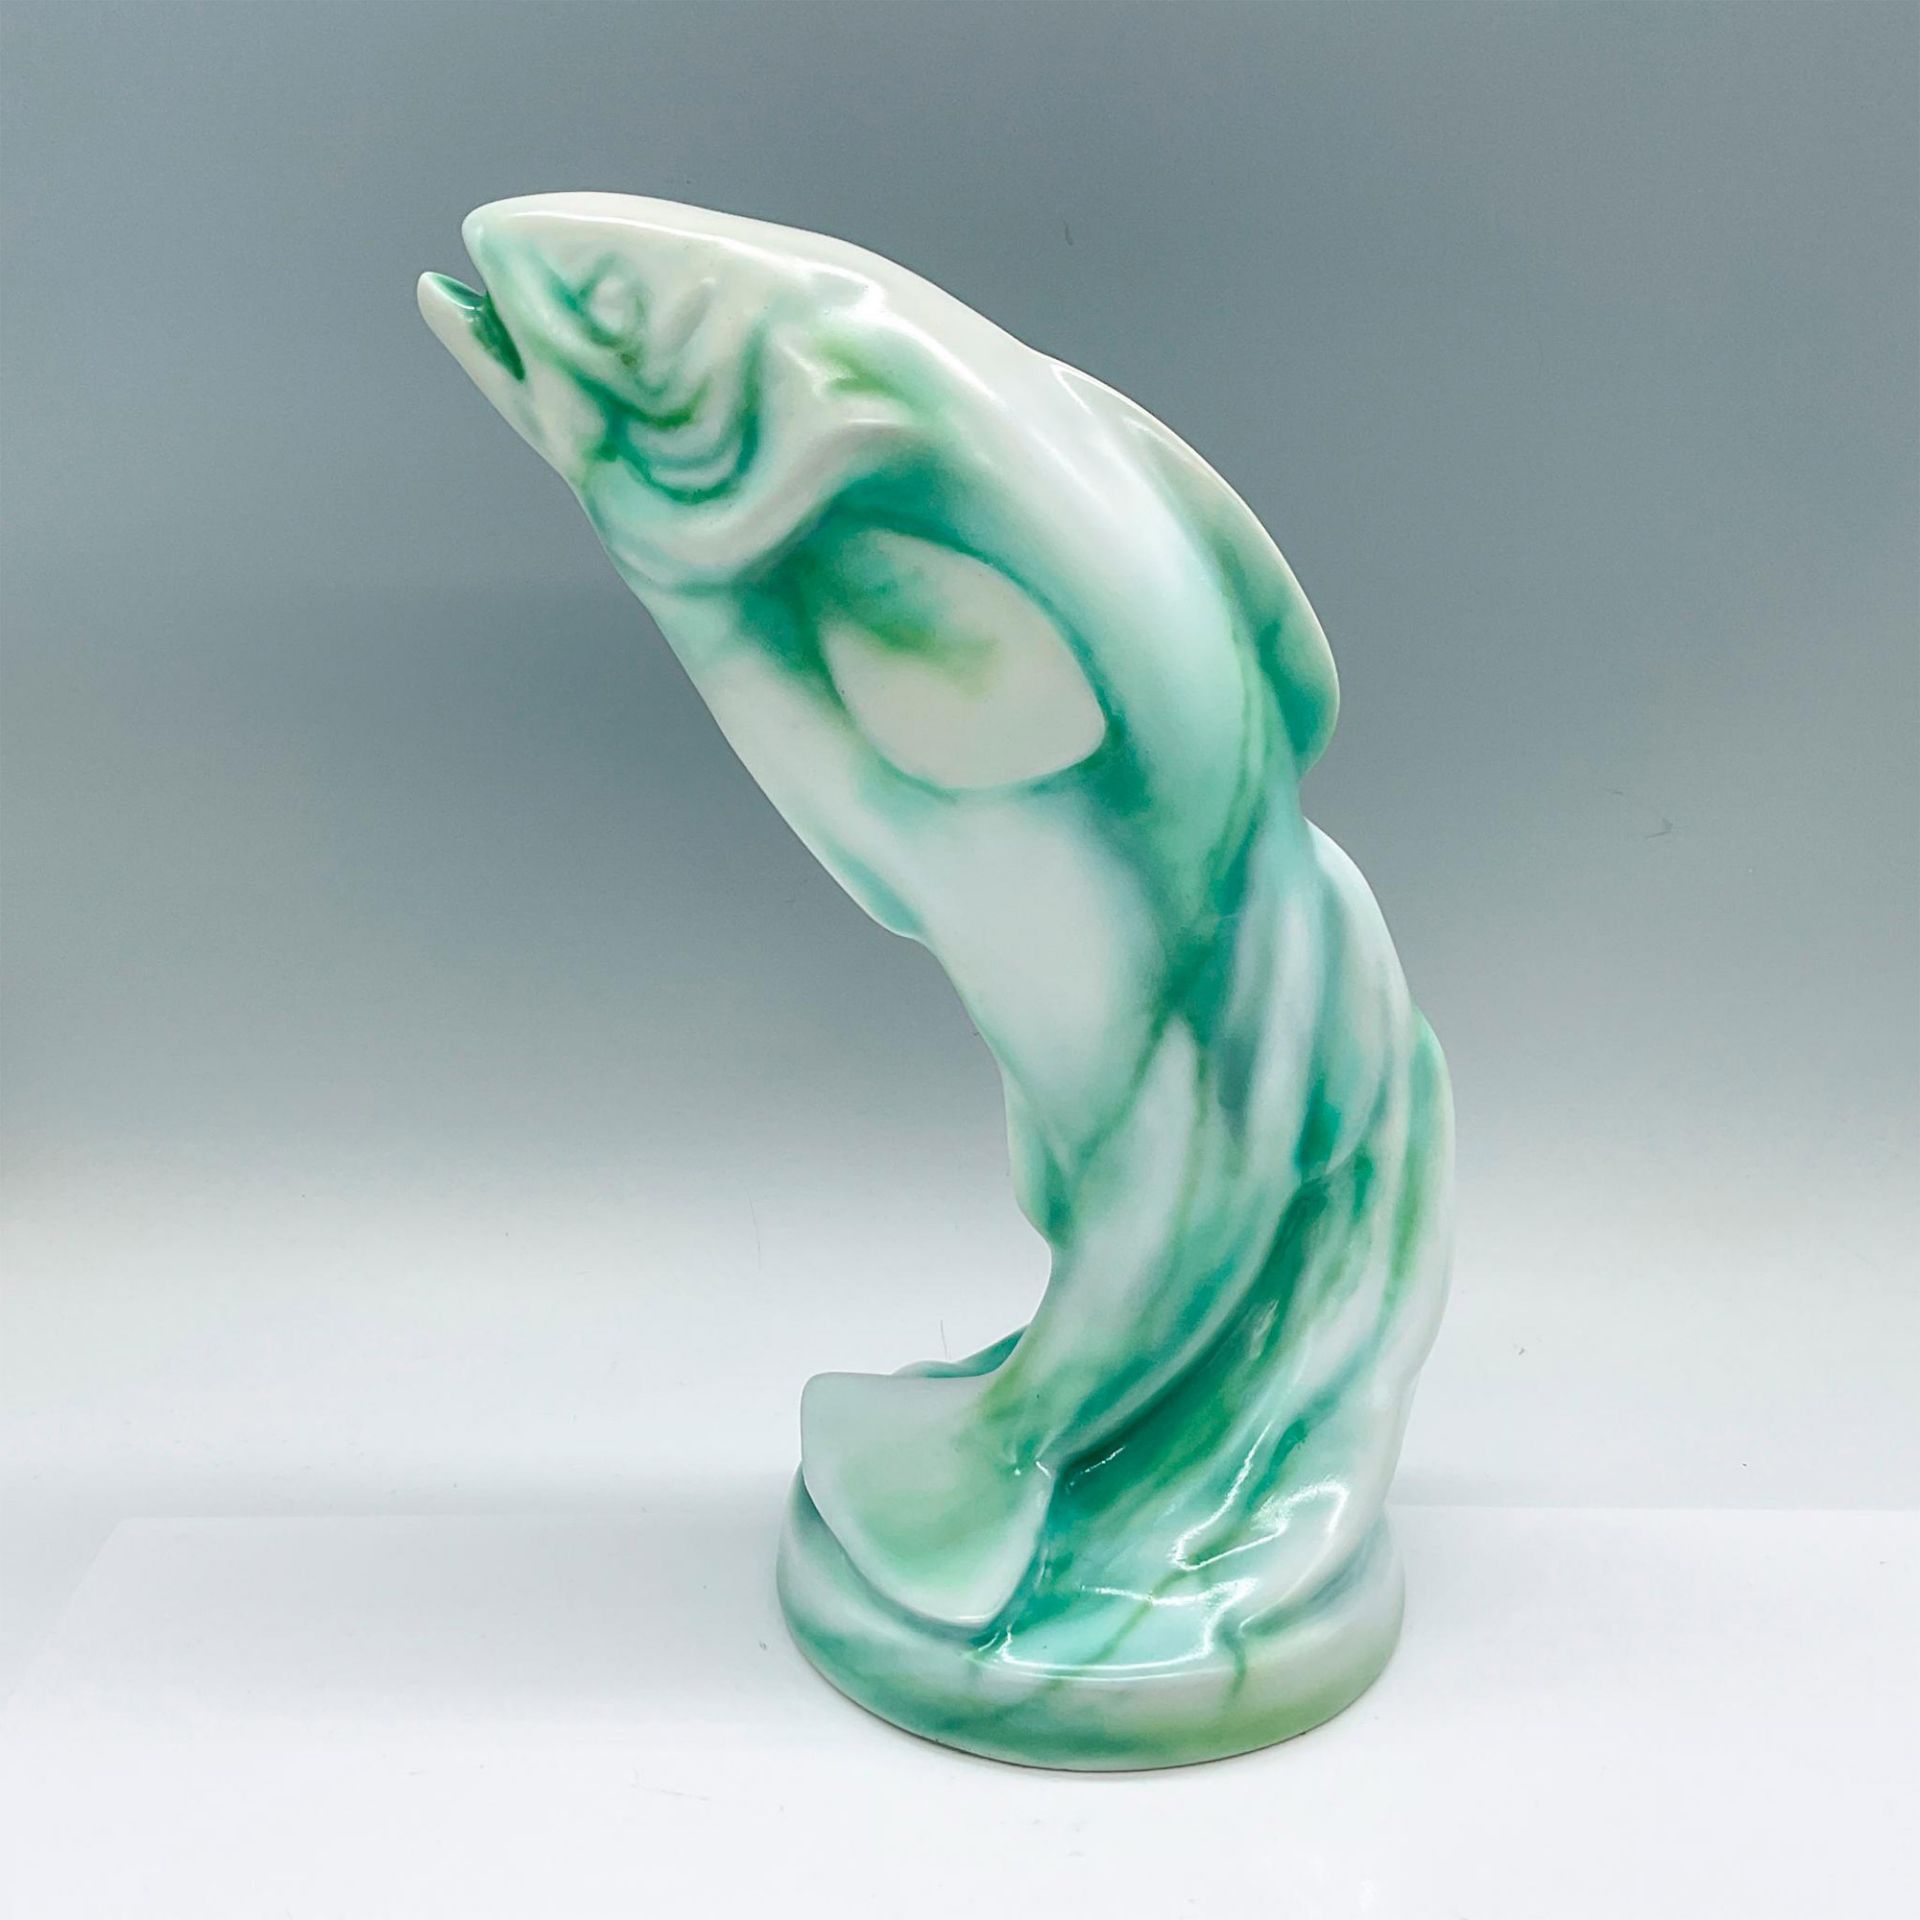 Royal Doulton Chinese Jade Figurine, Leaping Salmon - Image 2 of 3